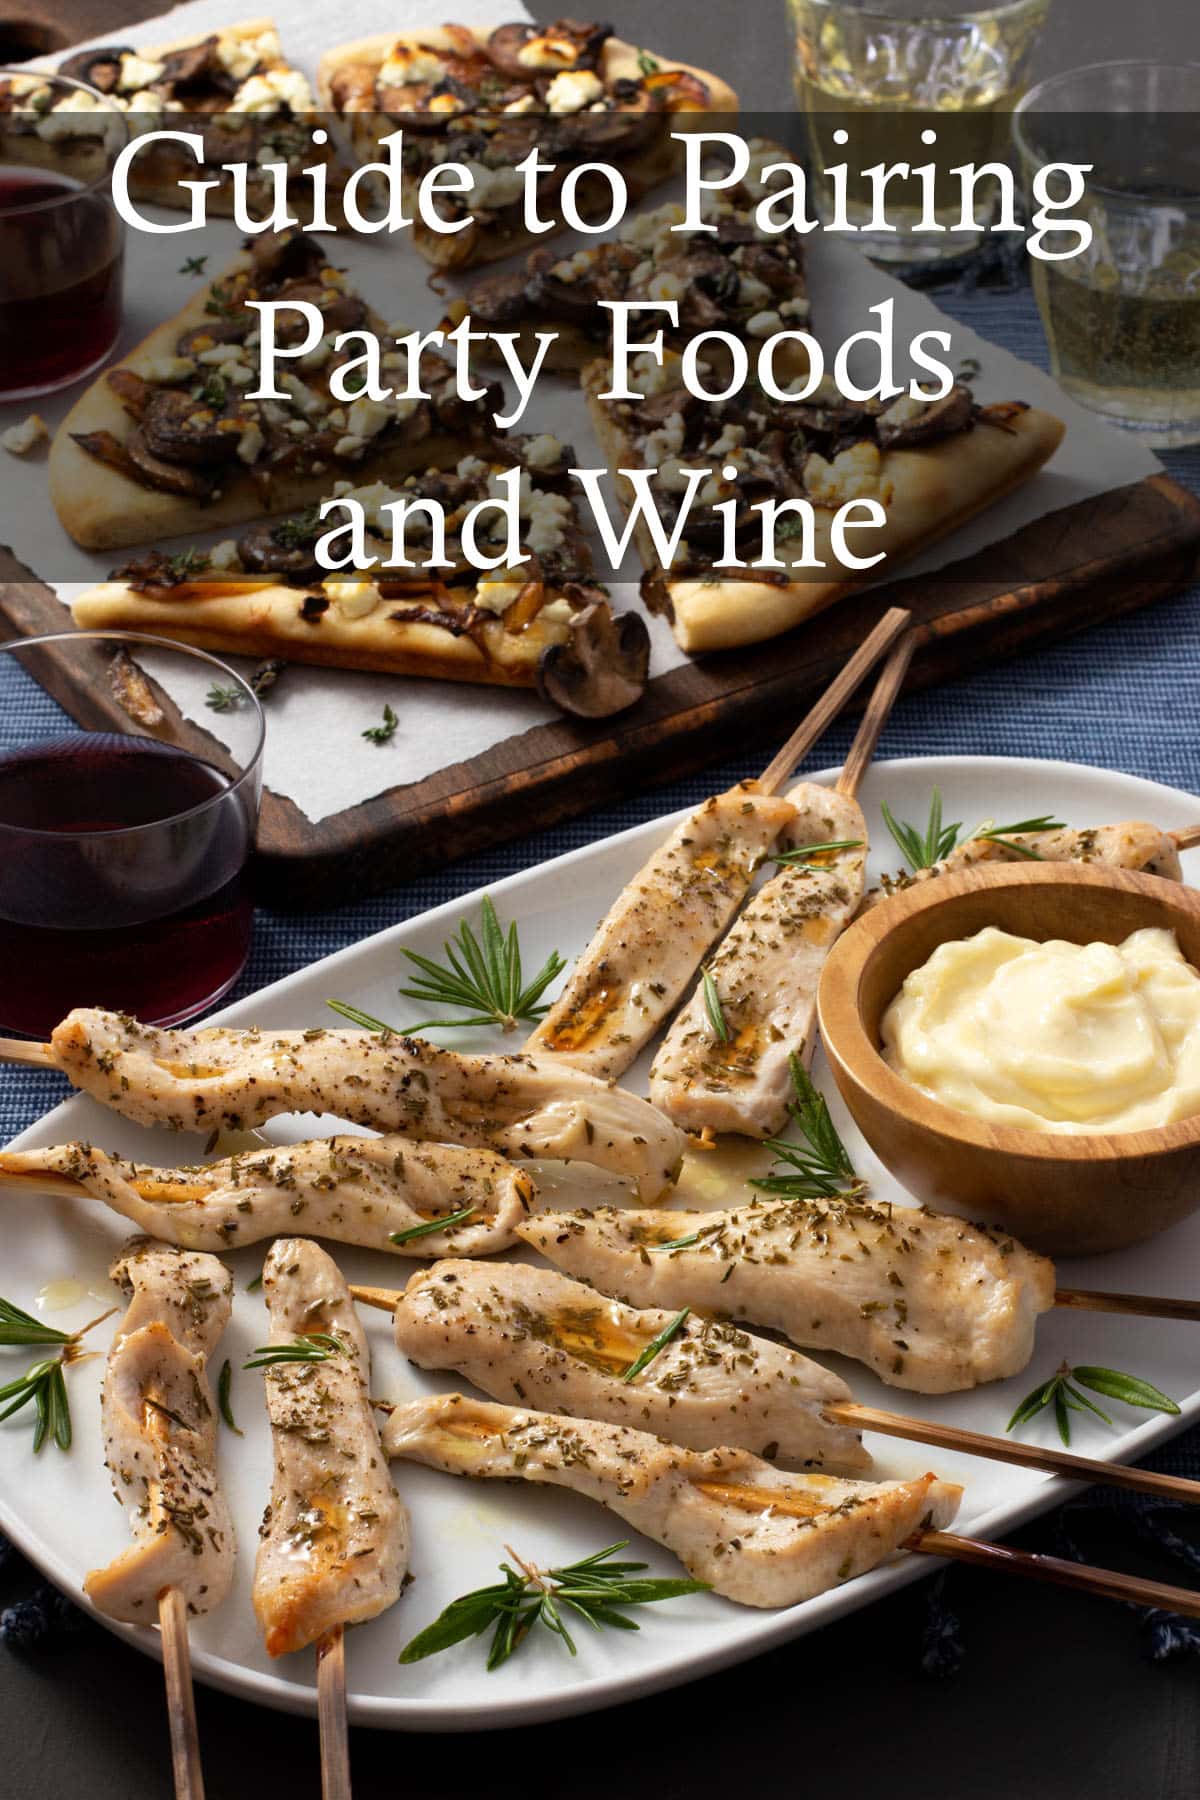 Guide to Pairing Party Food and Wines